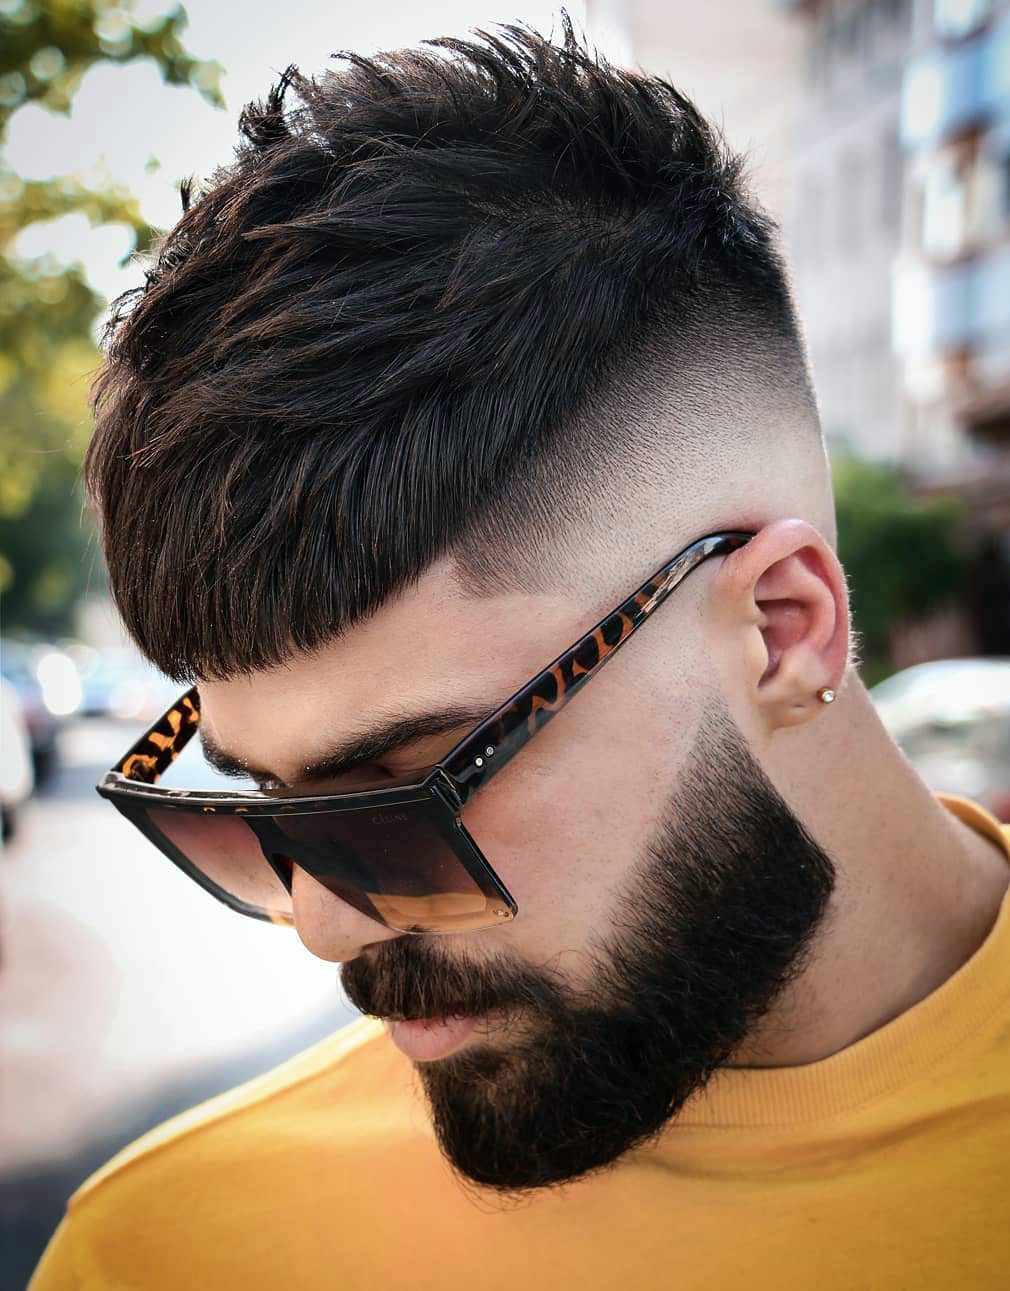 The Crop Top Fade: Historic and Contemporary | Haircut Inspiration